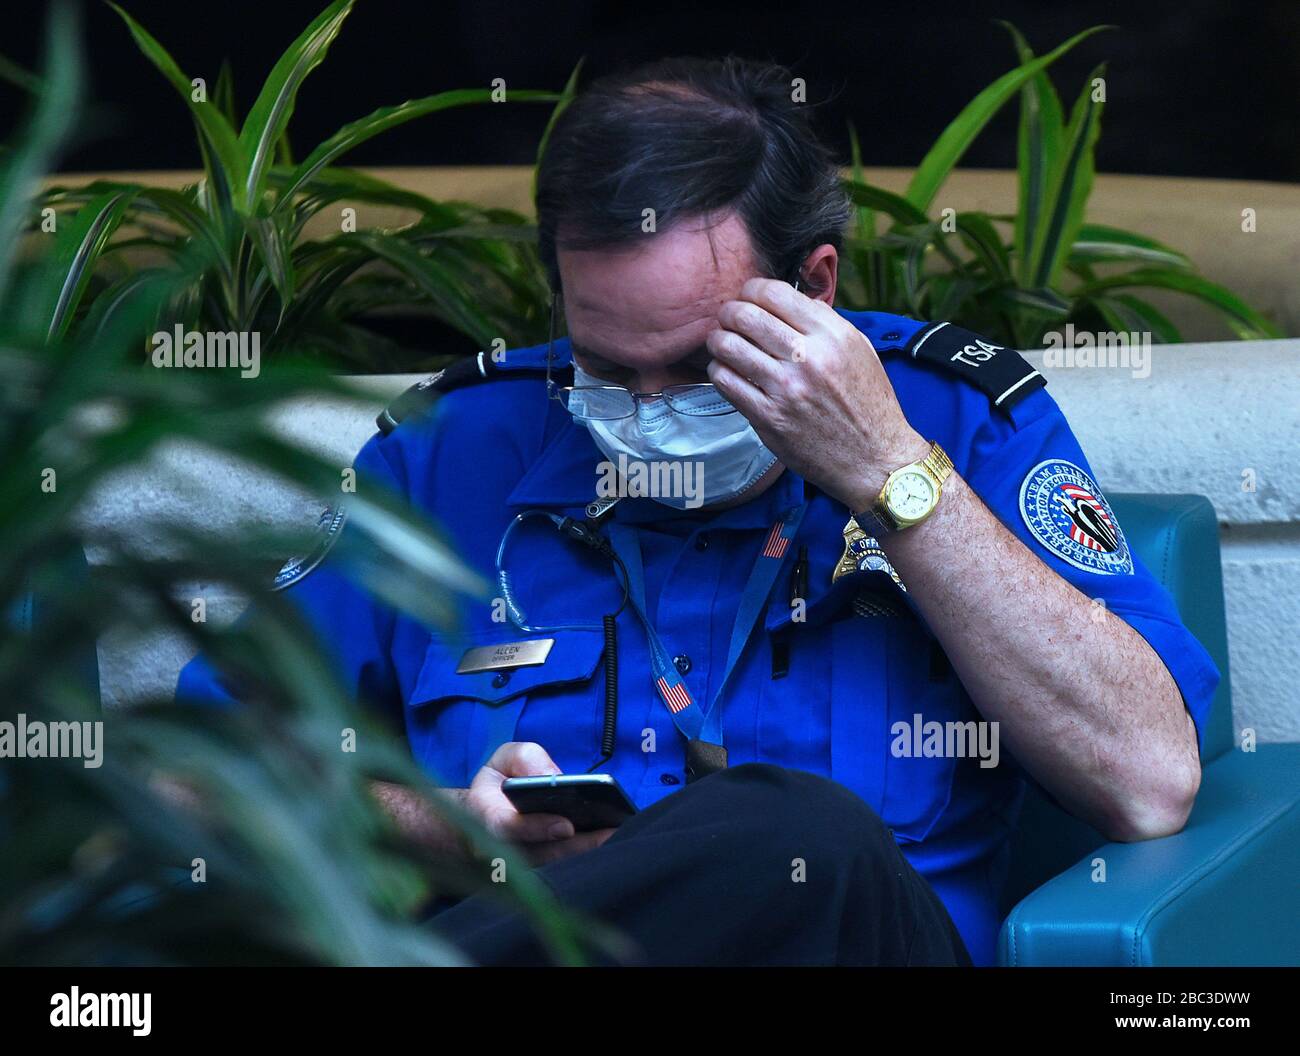 Orlando, United States. 02nd Apr, 2020. April 2, 2020 - Orlando, Florida, United States - A TSA officer wears a protective mask while taking a break on April 2, 2020 at Orlando International Airport in Orlando, Florida. In the past 14 days across the nation, 58 TSA screening officers have tested positive for COVID-19, including 9 in Orlando. Credit: Paul Hennessy/Alamy Live News Stock Photo